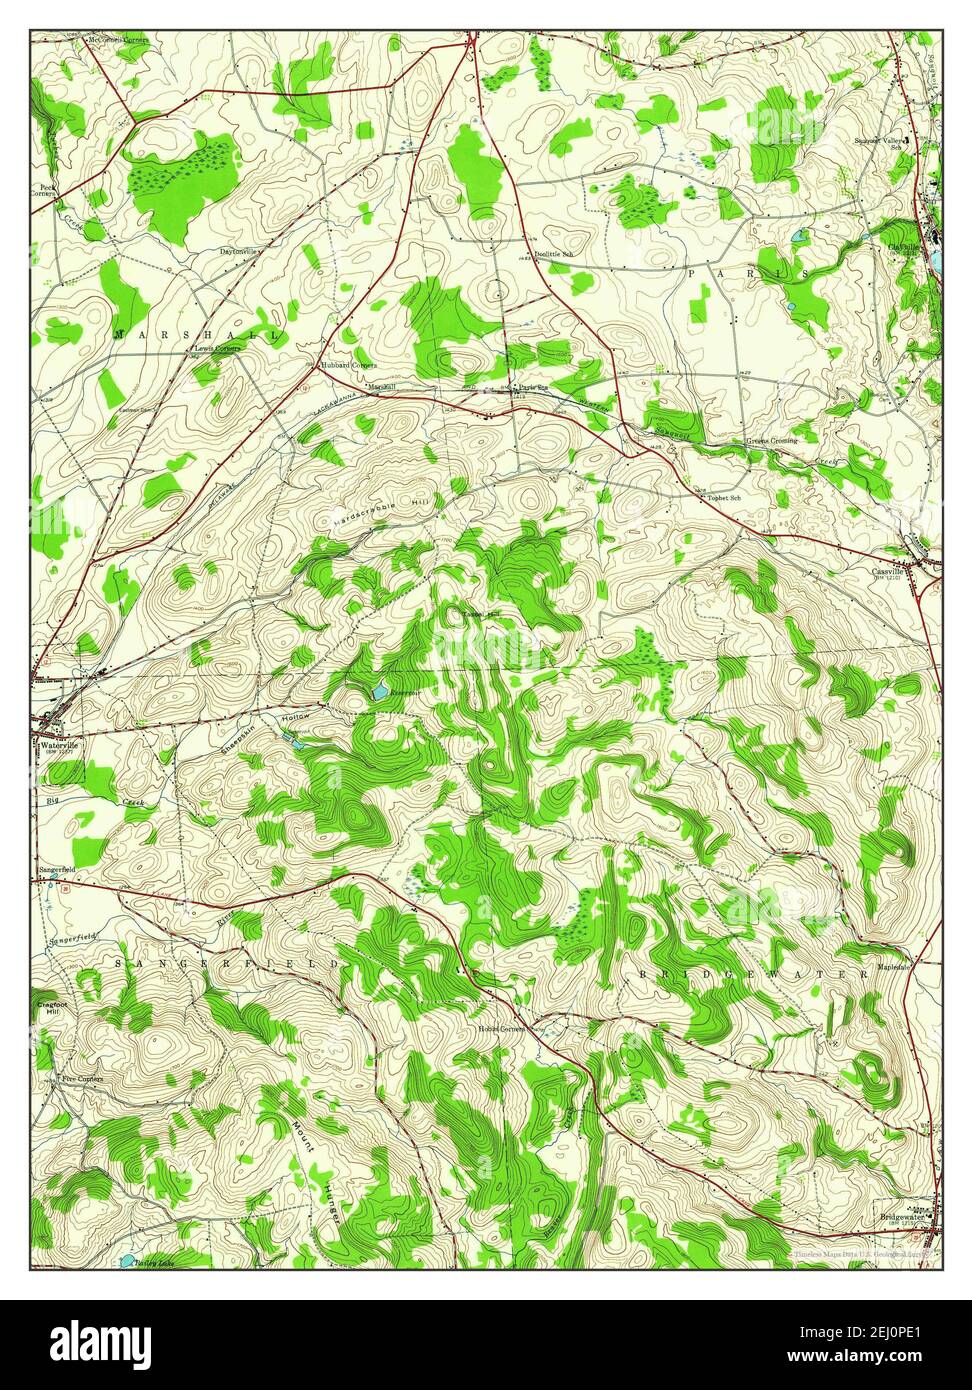 Cassville, New York, map 1943, 1:24000, United States of America by Timeless Maps, data U.S. Geological Survey Stock Photo